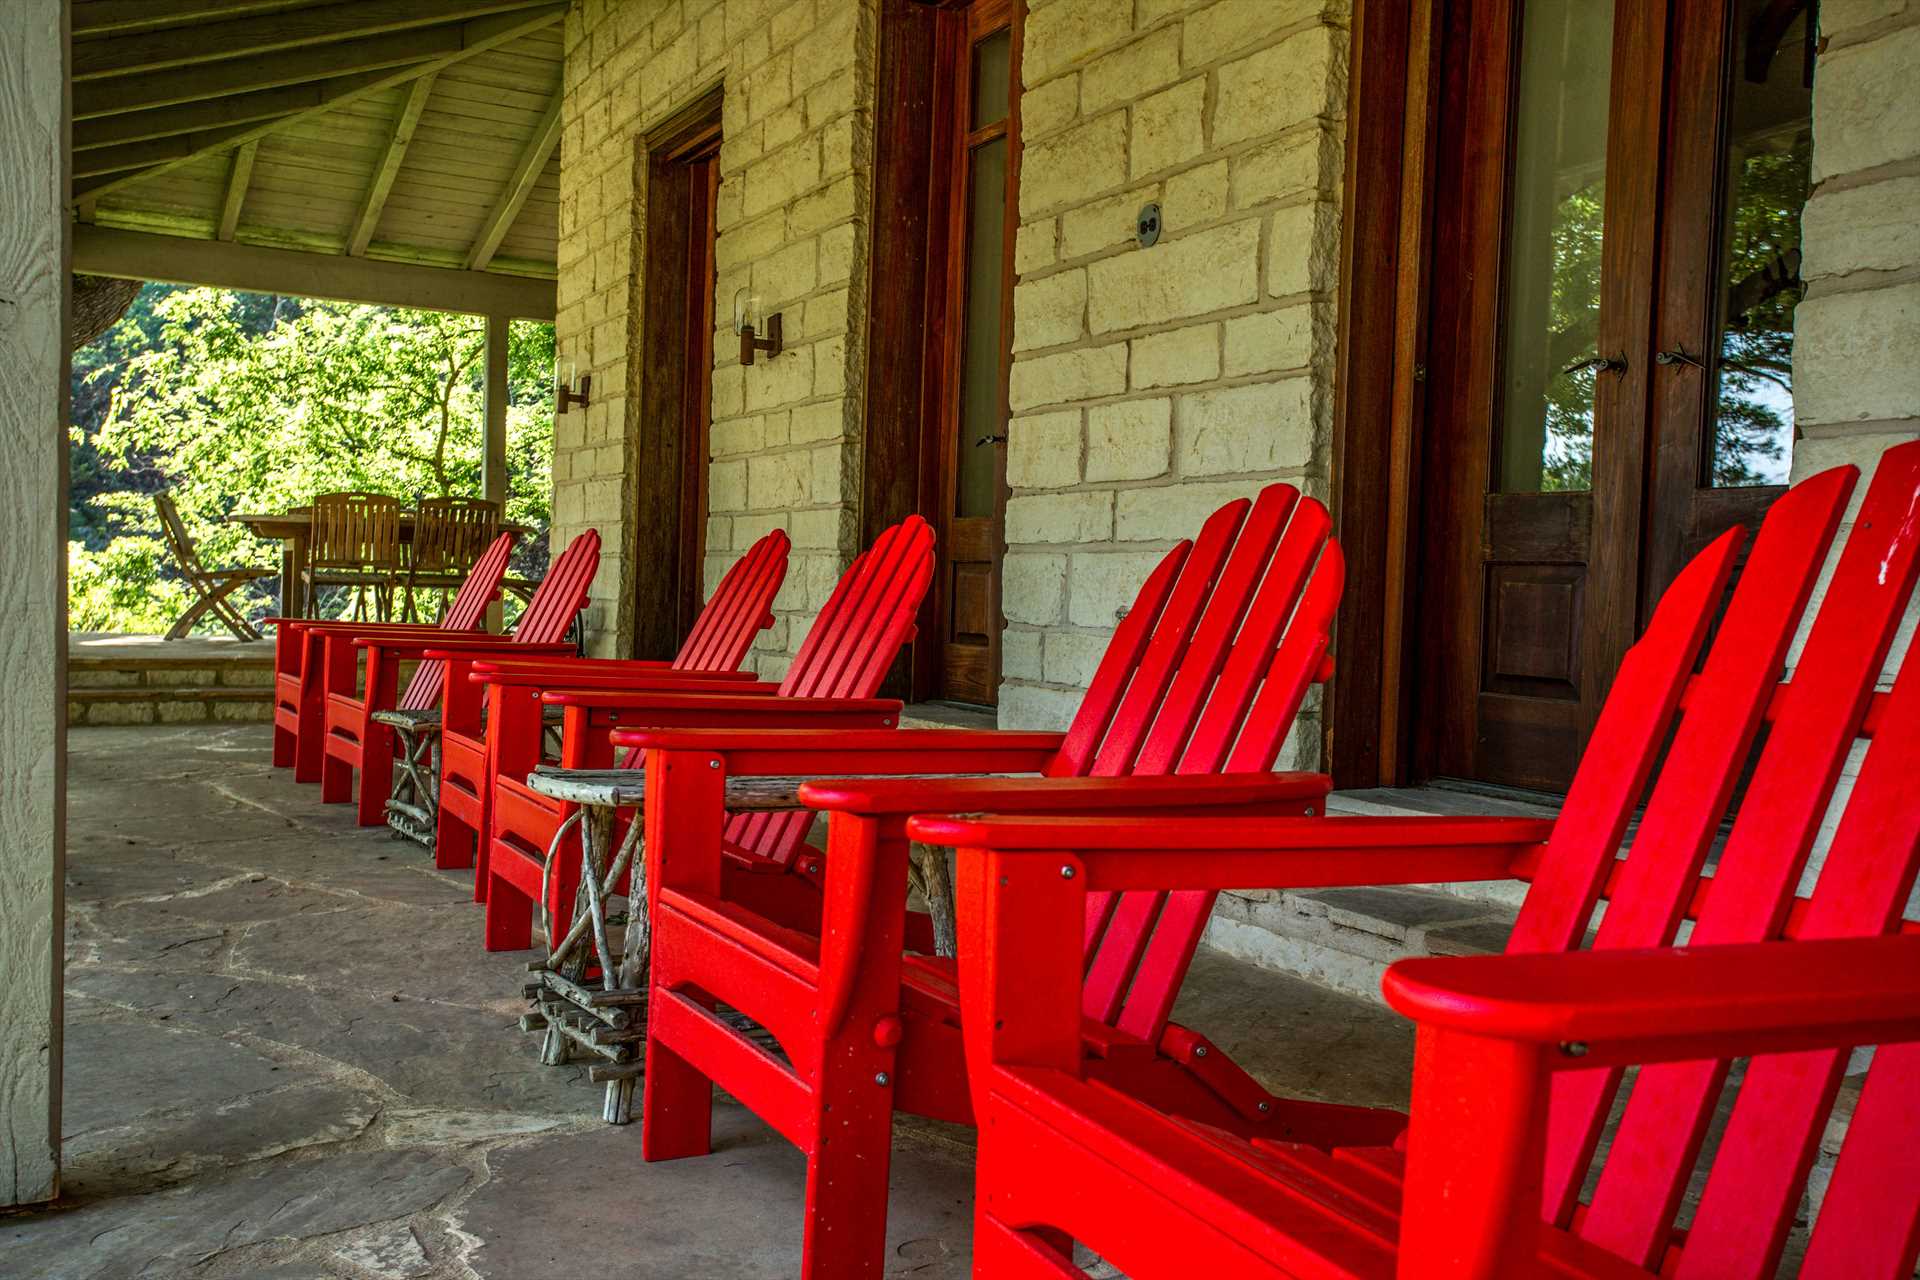                                                 Outdoor furniture adds a dash of color to the Homestead's shaded patio, as well as a comfortable place to relax and enjoy the view!